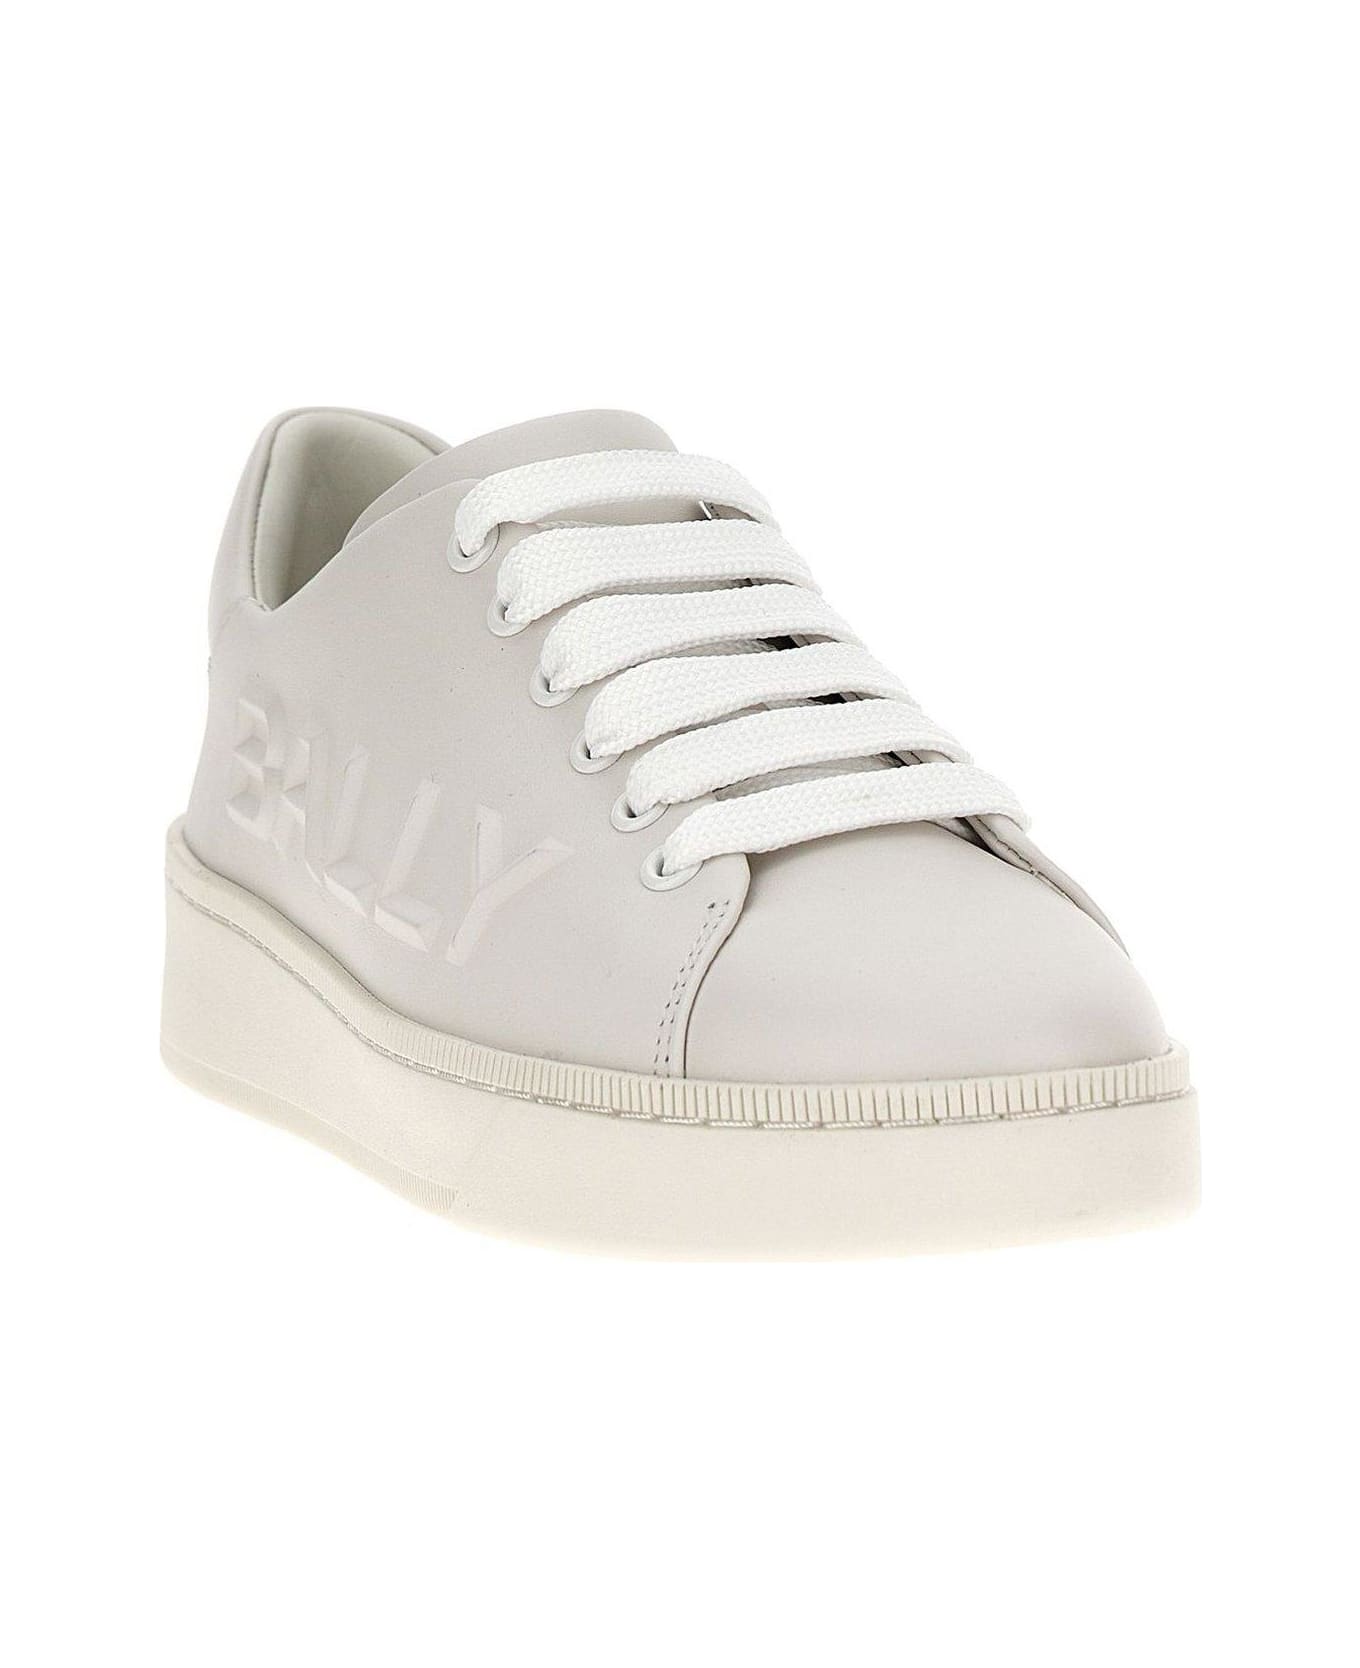 Bally Round Toe Lace-up Sneakers - White